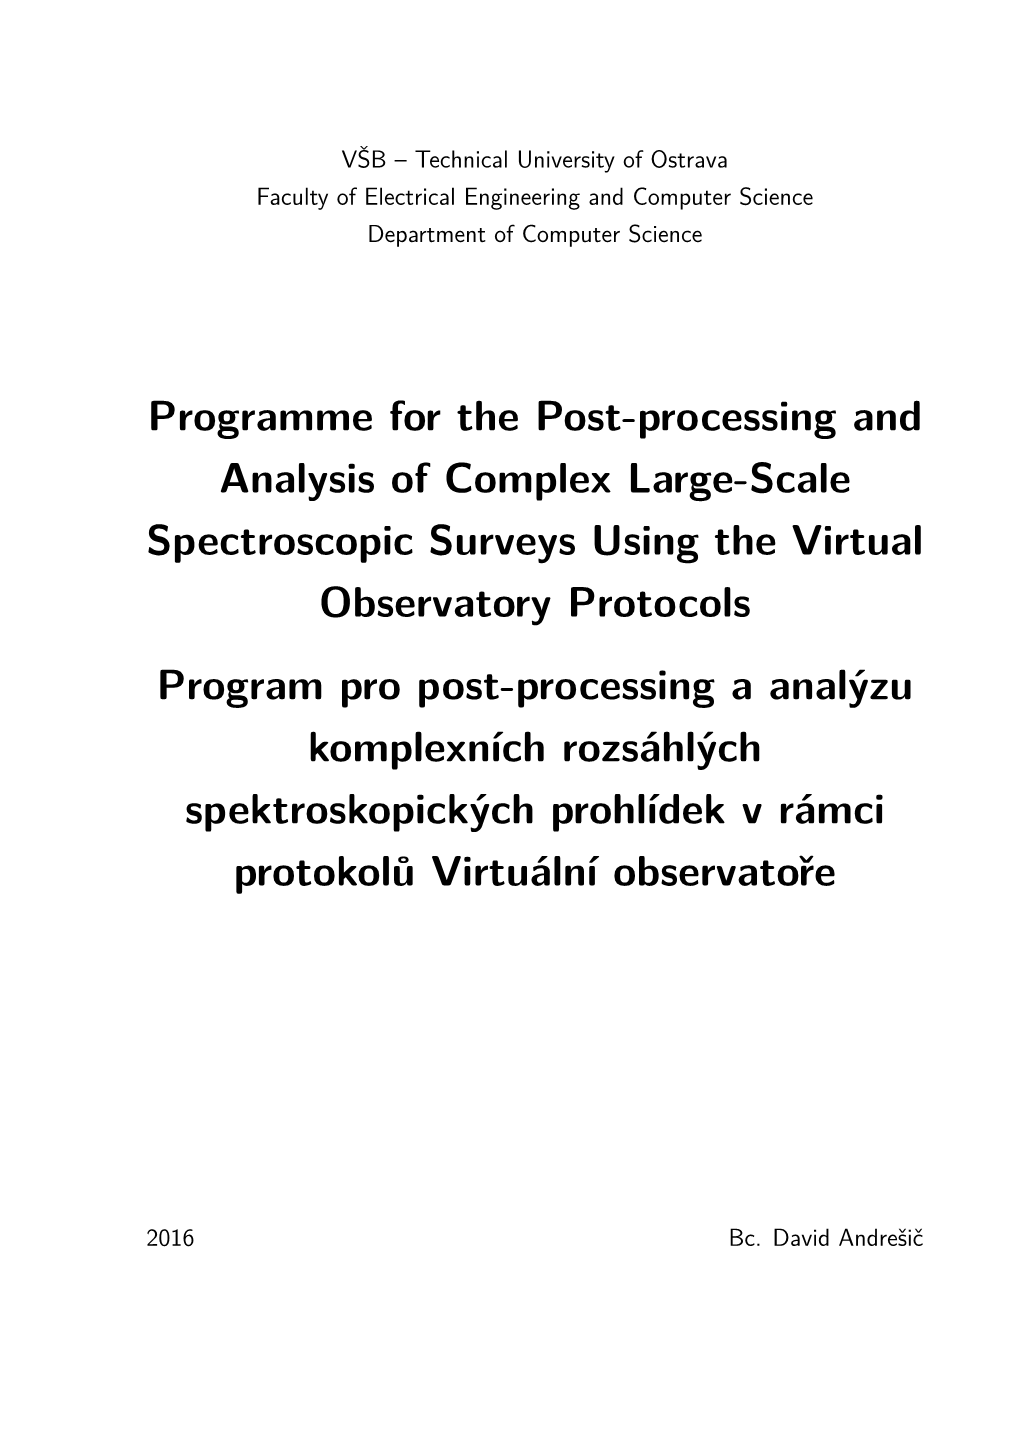 Programme for the Post-Processing and Analysis of Complex Large